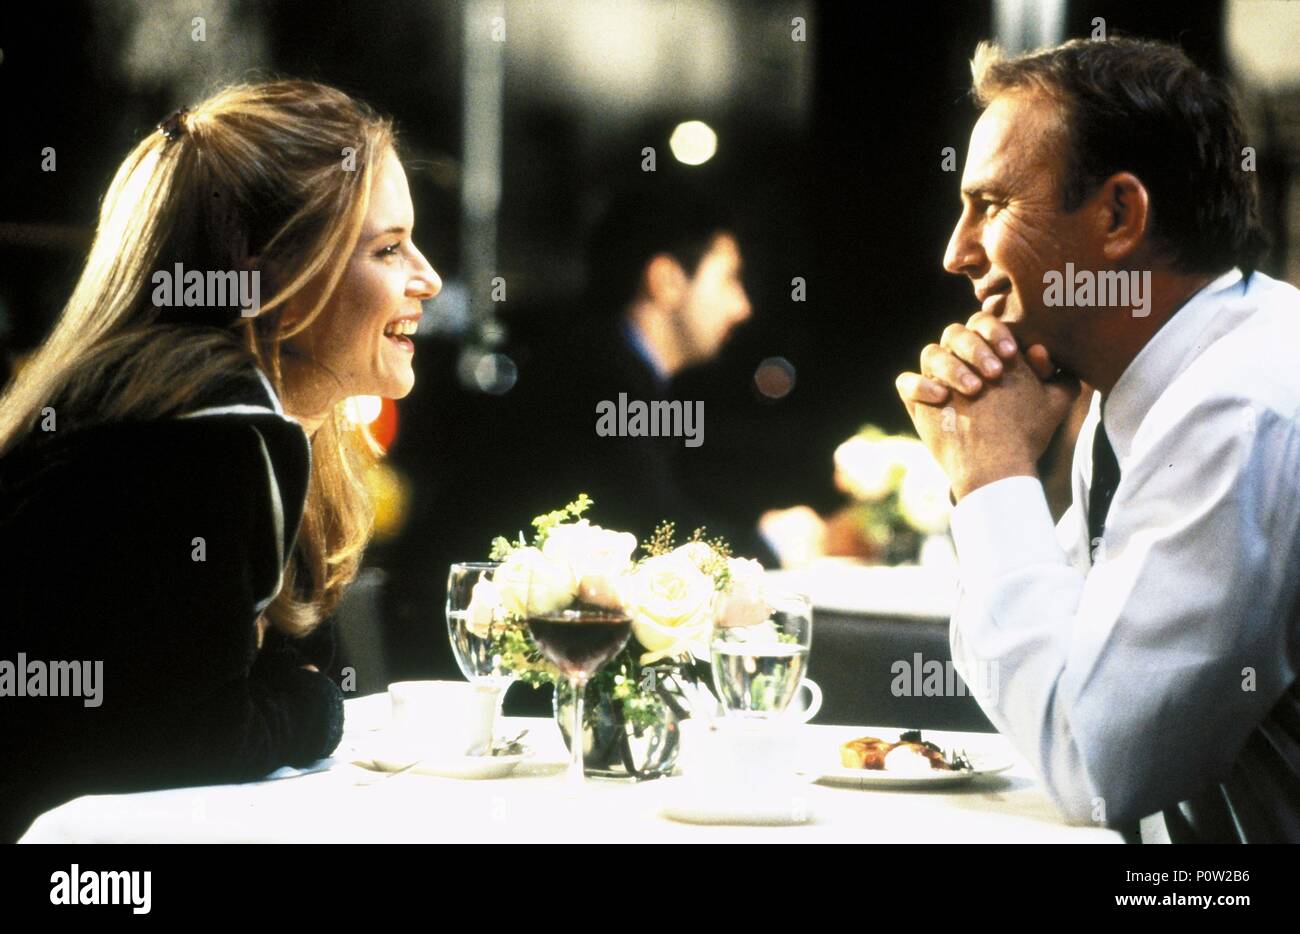 Original Film Title: FOR LOVE OF THE GAME.  English Title: FOR LOVE OF THE GAME.  Film Director: SAM RAIMI.  Year: 1999.  Stars: KELLY PRESTON; KEVIN COSTNER. Credit: UNIVERSAL PICTURES / GLASS, BEN / Album Stock Photo